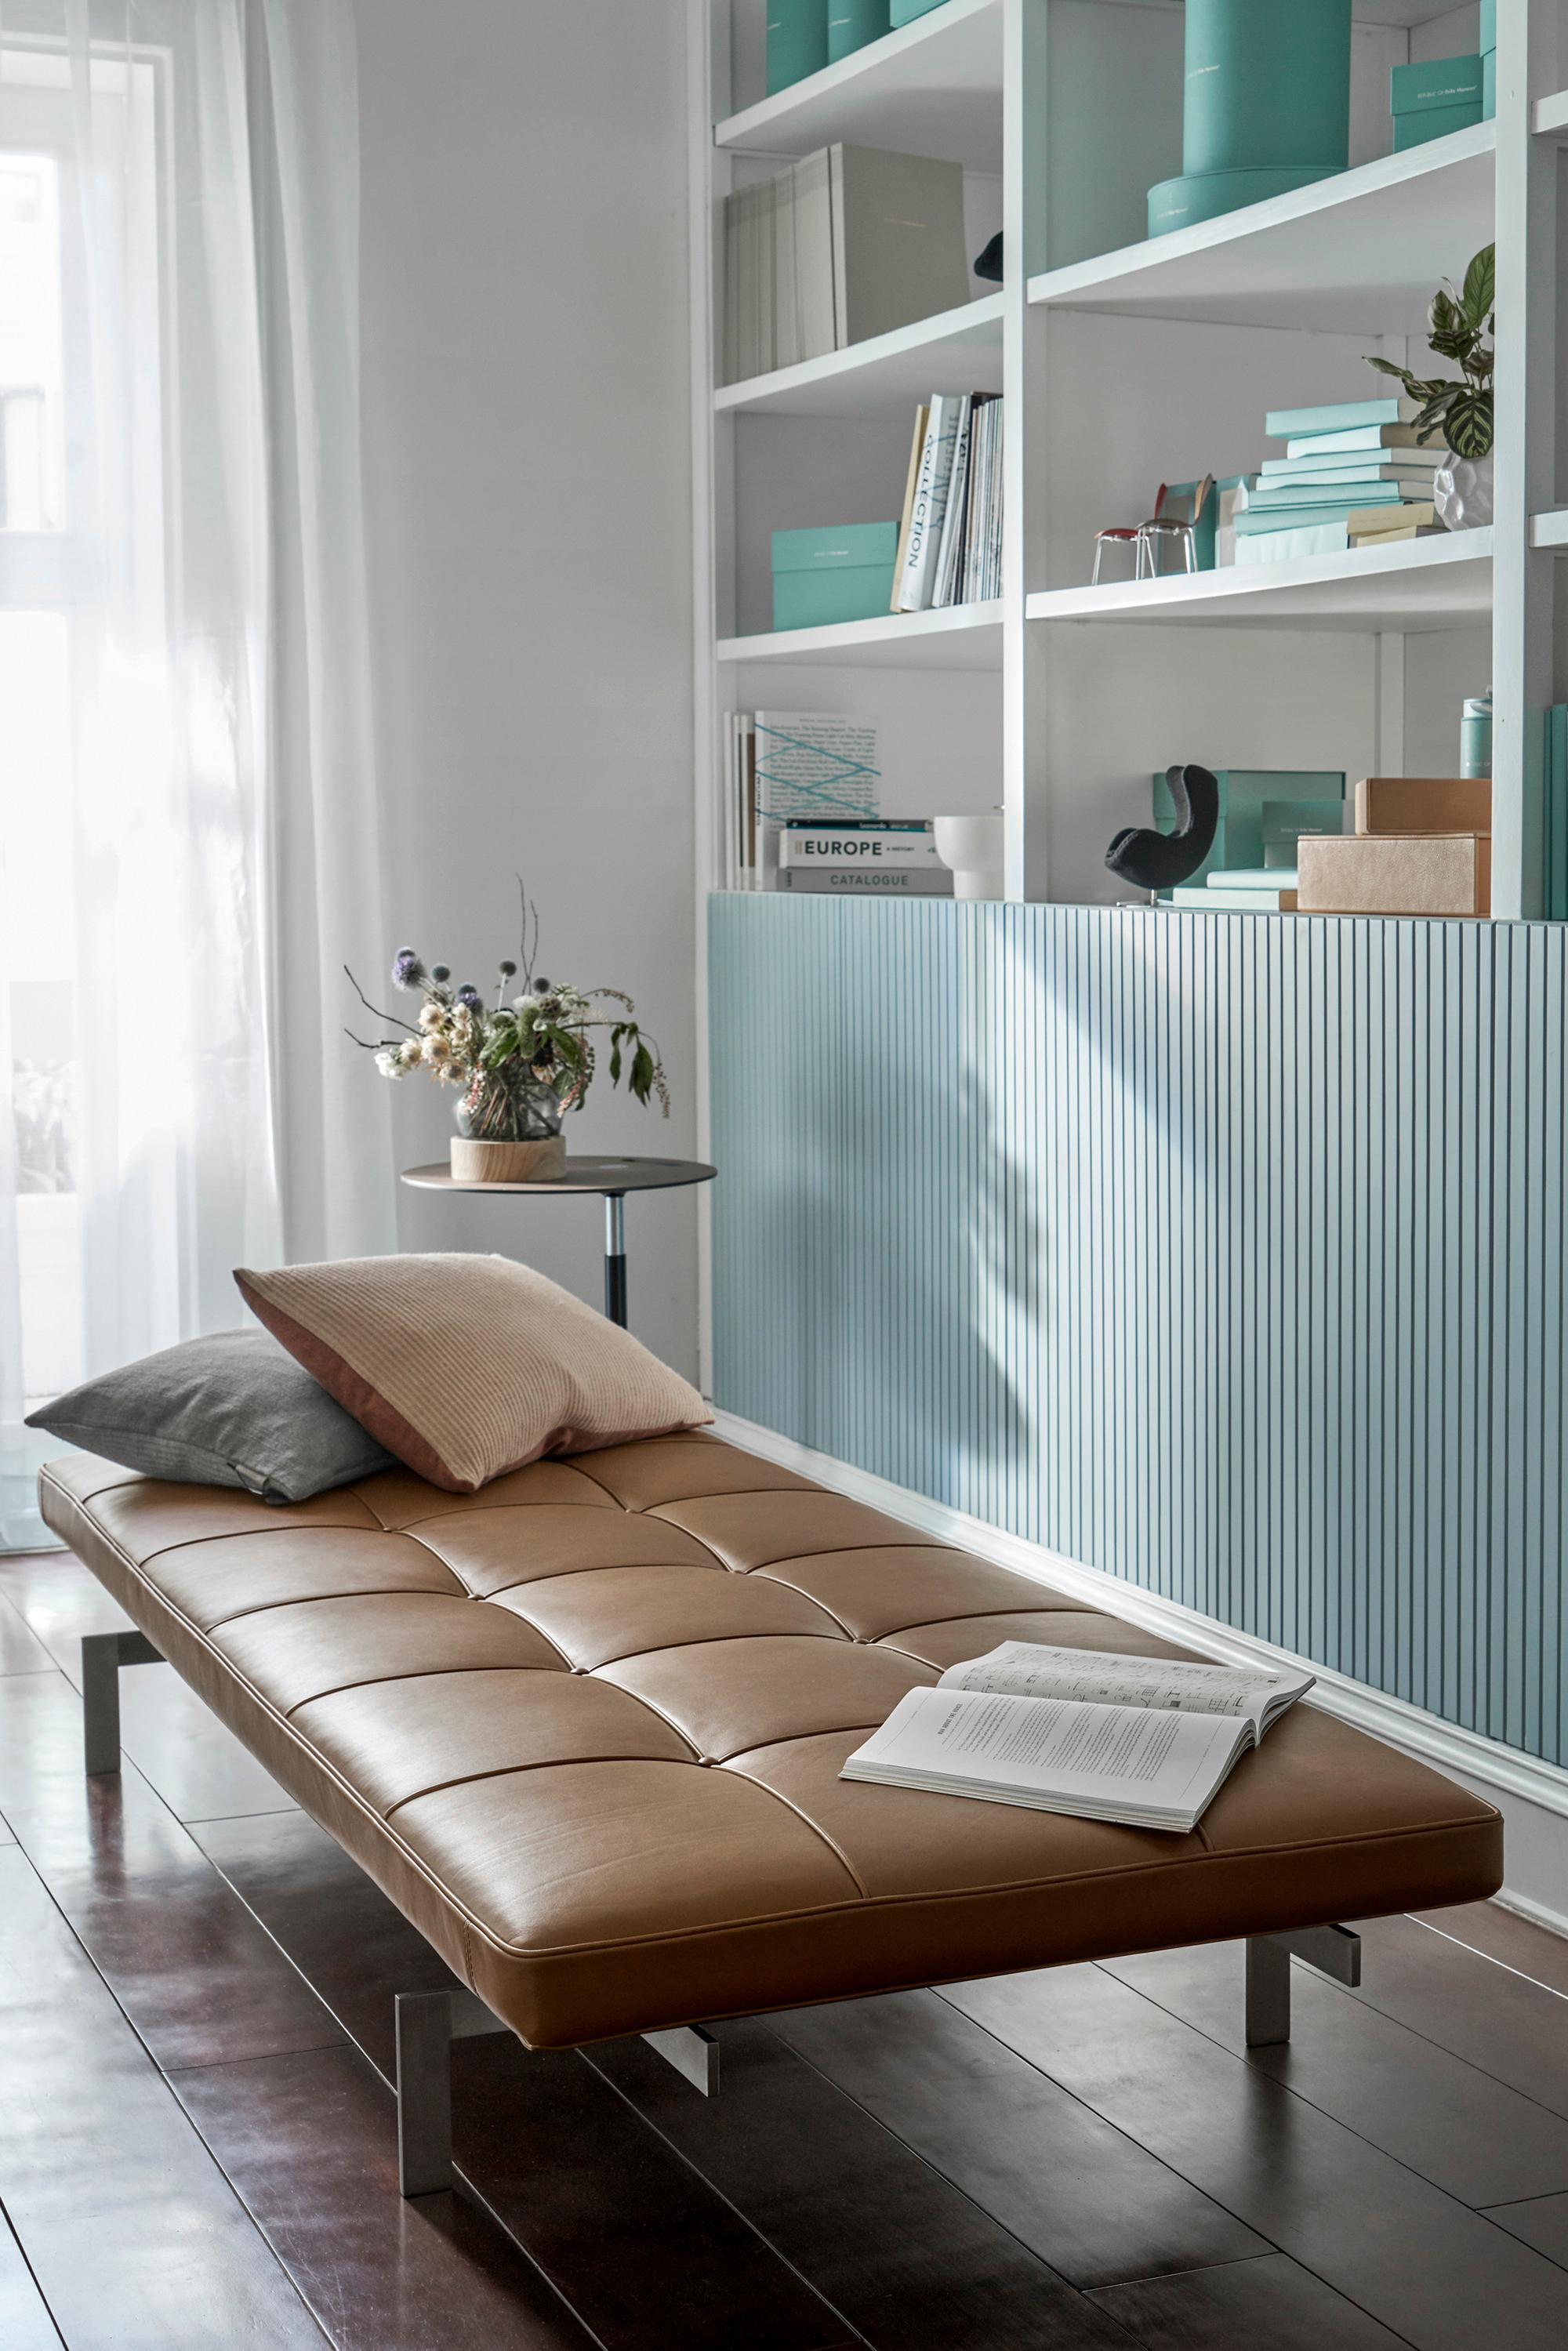 Poul Kjærholm 'PK80' Daybed for Fritz Hansen in Leather (Cat. 4)

Established in 1872, Fritz Hansen has become synonymous with legendary Danish design. Combining timeless craftsmanship with an emphasis on sustainability, the brand’s re-editions of